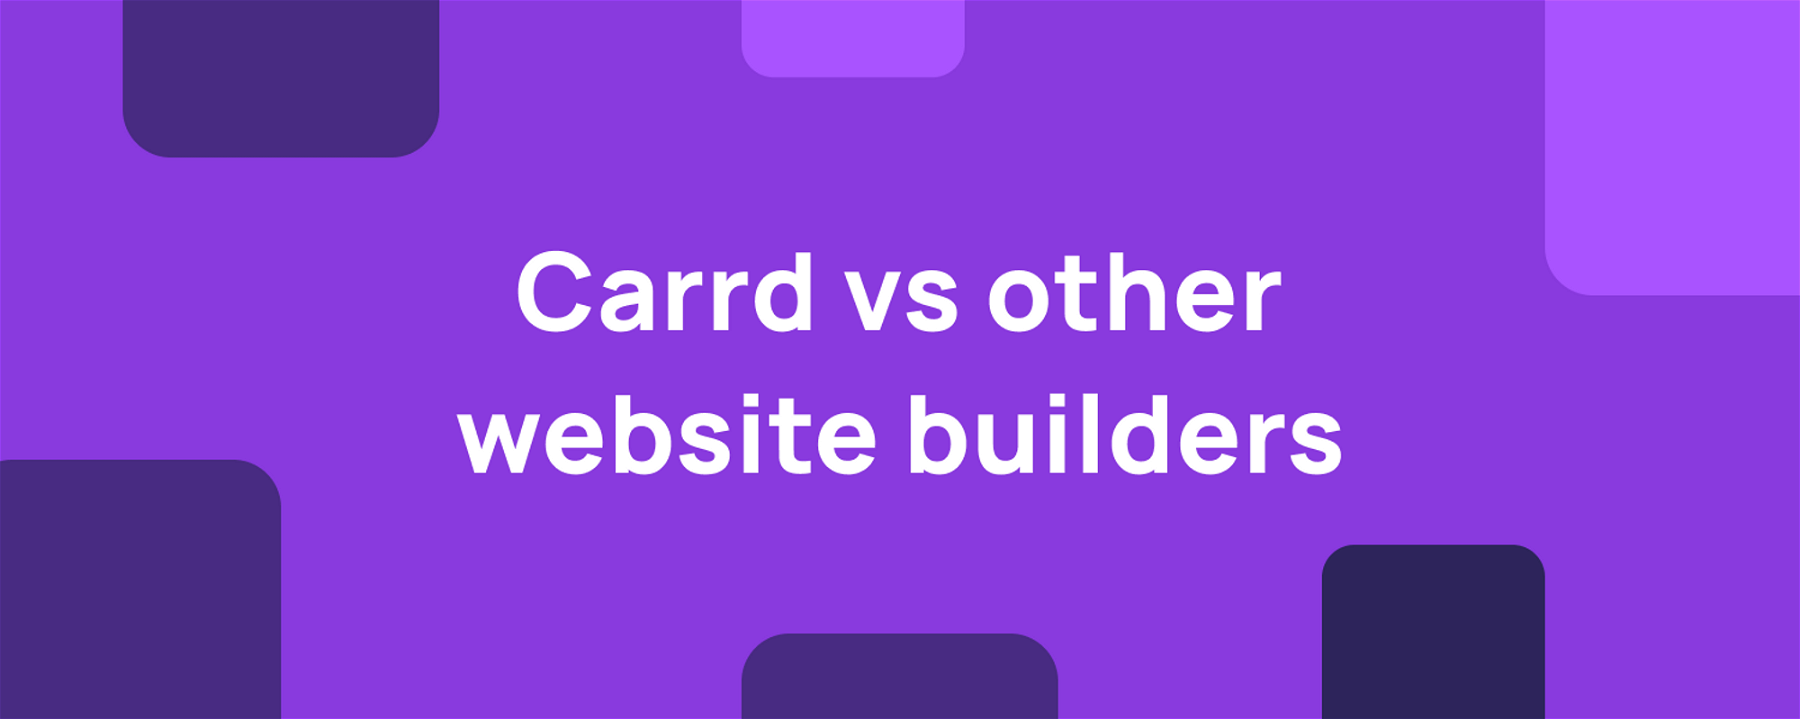 Carrd vs other website builders â€“ which is best?